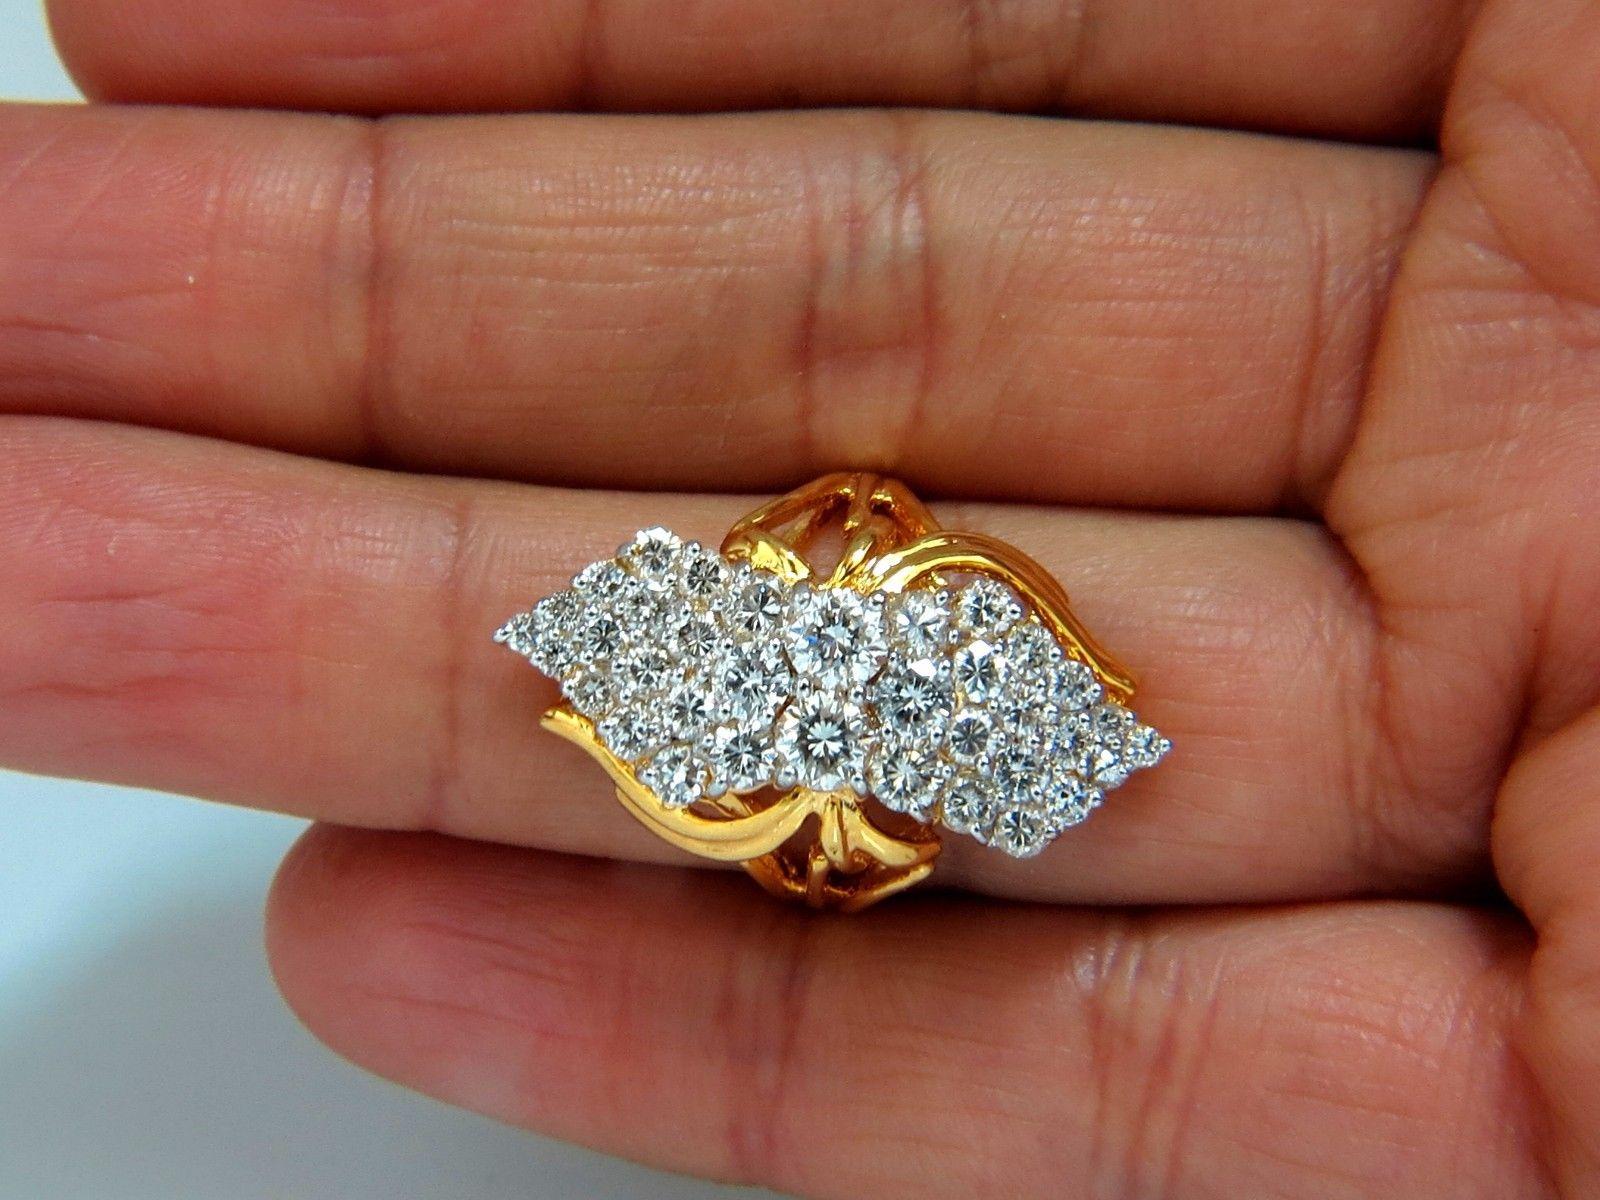 Rounds Cluster cocktail Prime.

3.50cts Natural diamonds Ring.

Full cut Brilliants

G-color, Vs-1 Vs-2  clarity.

14kt. yellow gold

8.8 grams.

current ring size: 8.25

May be resized, please inquire. 

Deck of ring: 1.4 x .50 inch

Depth: .40